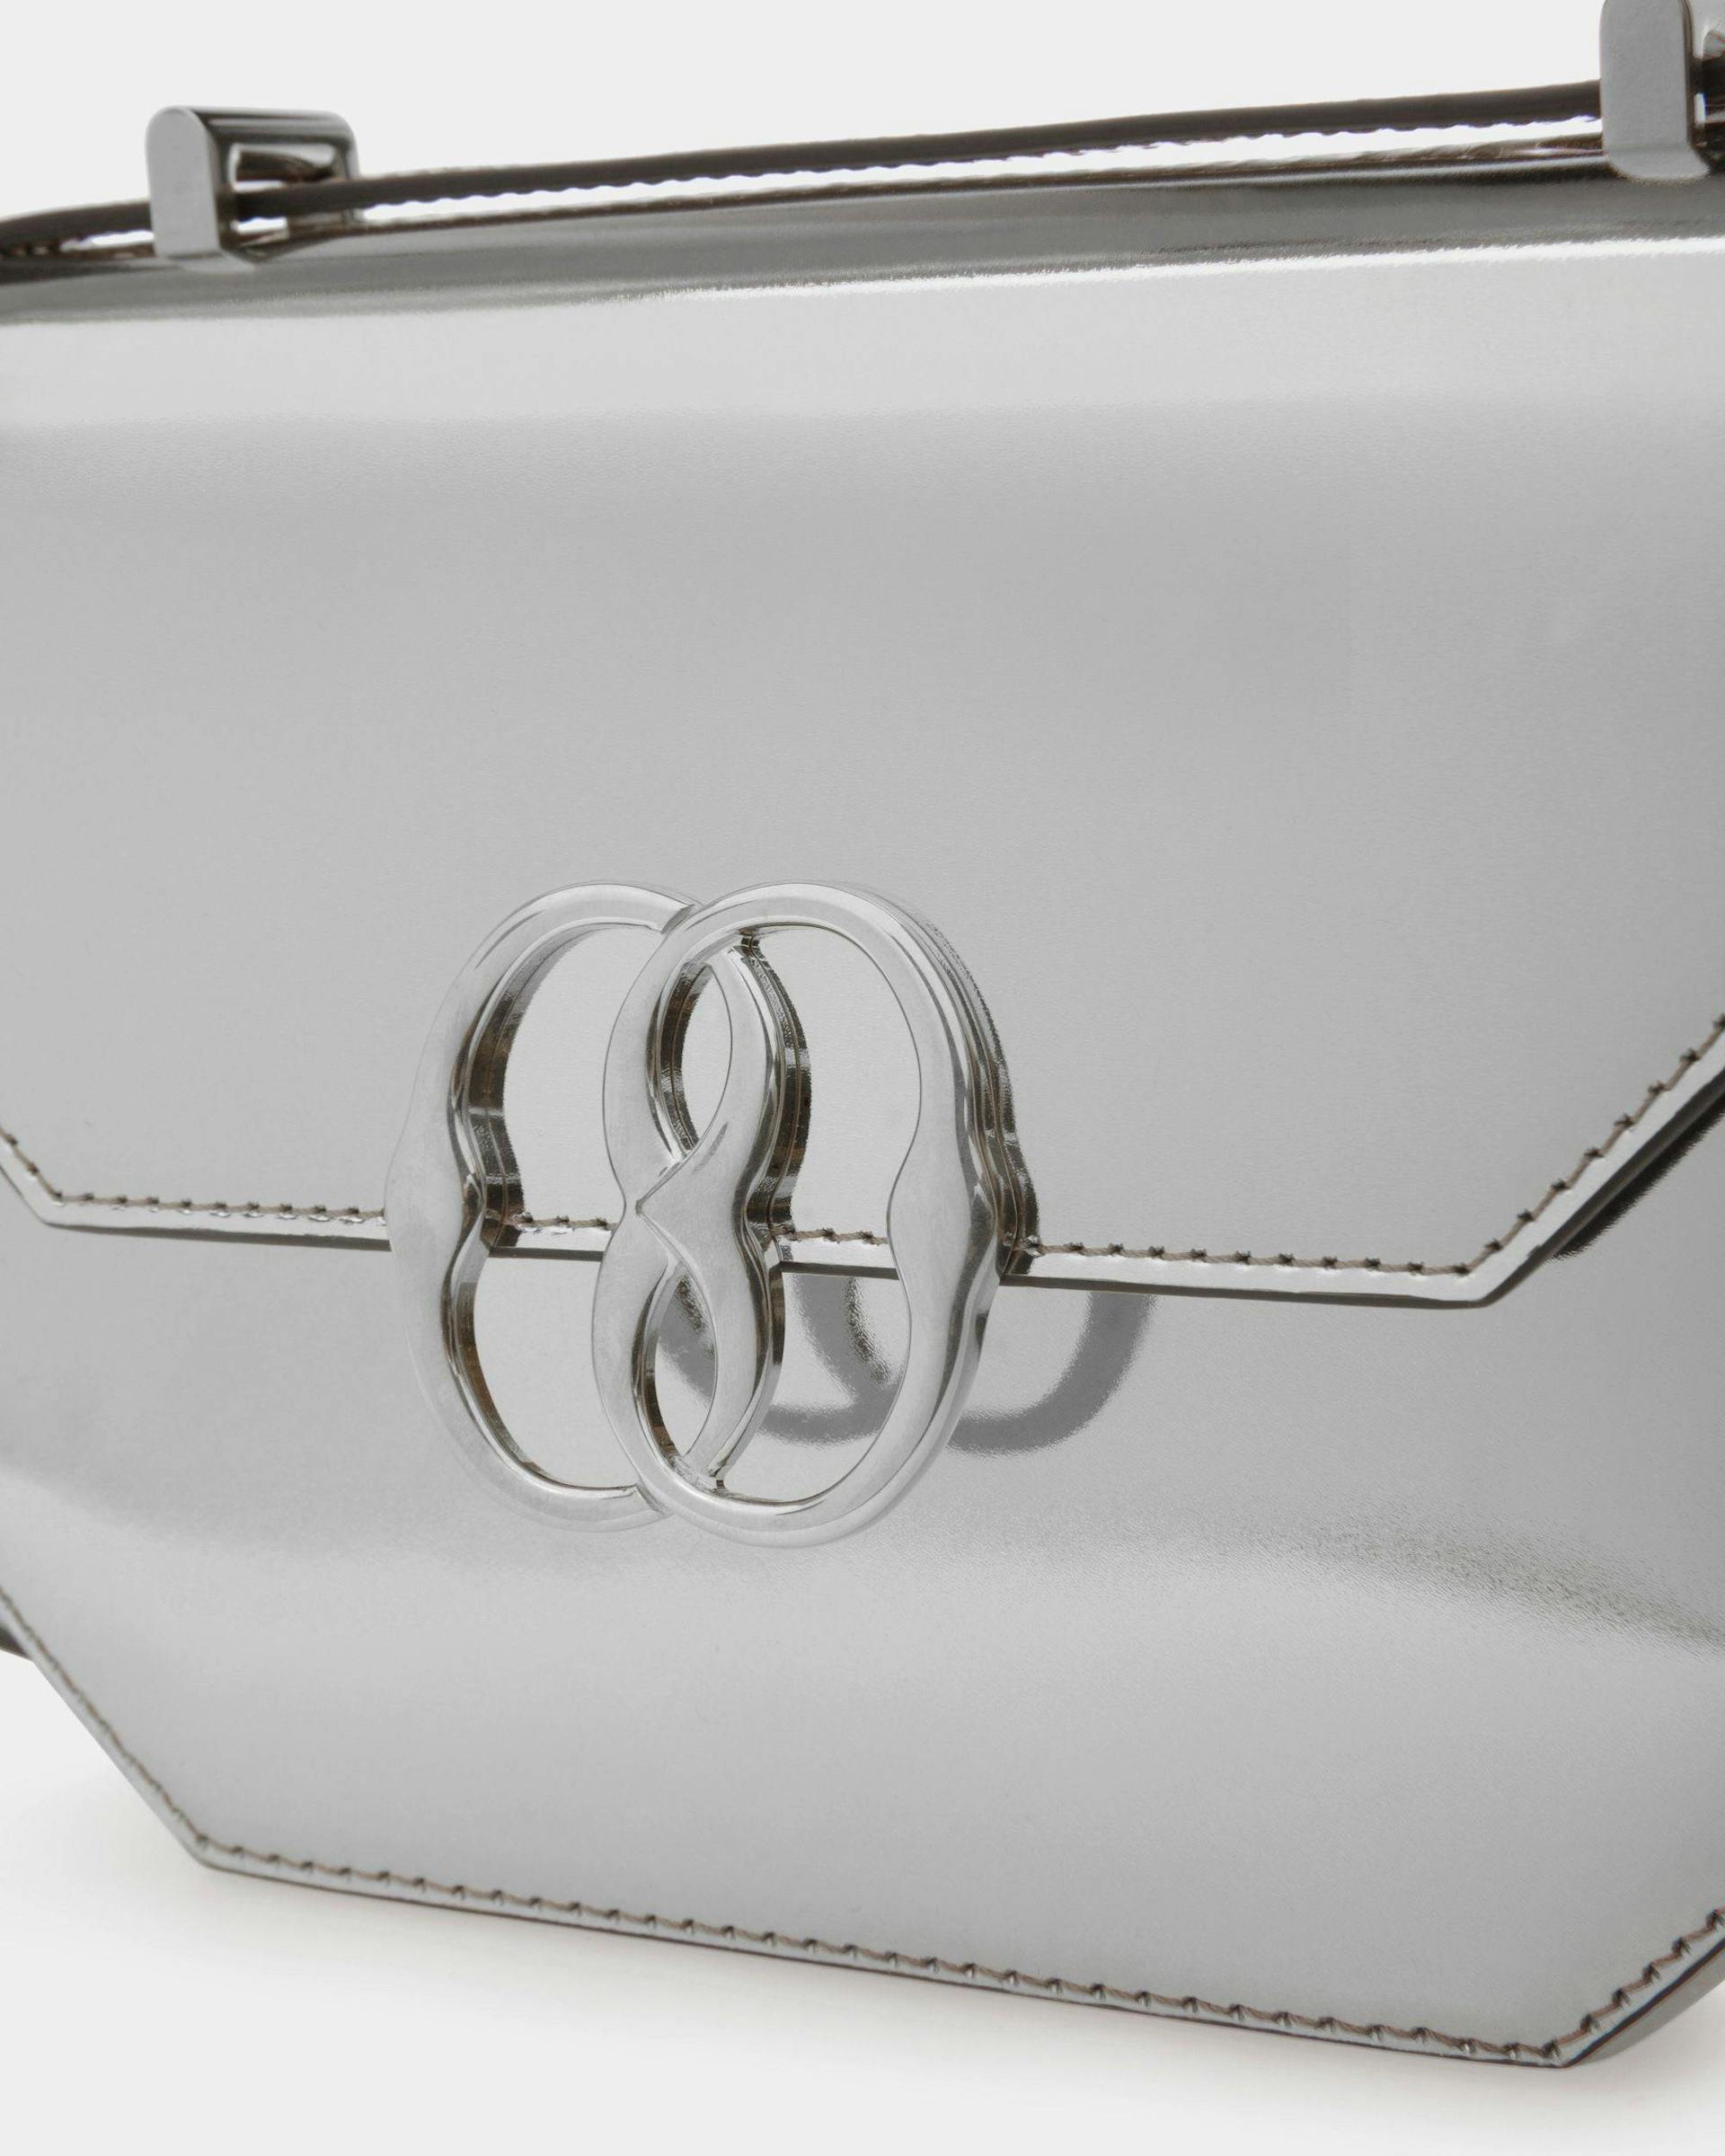 Women's Emblem Minibag In Silver Leather | Bally | Still Life Detail